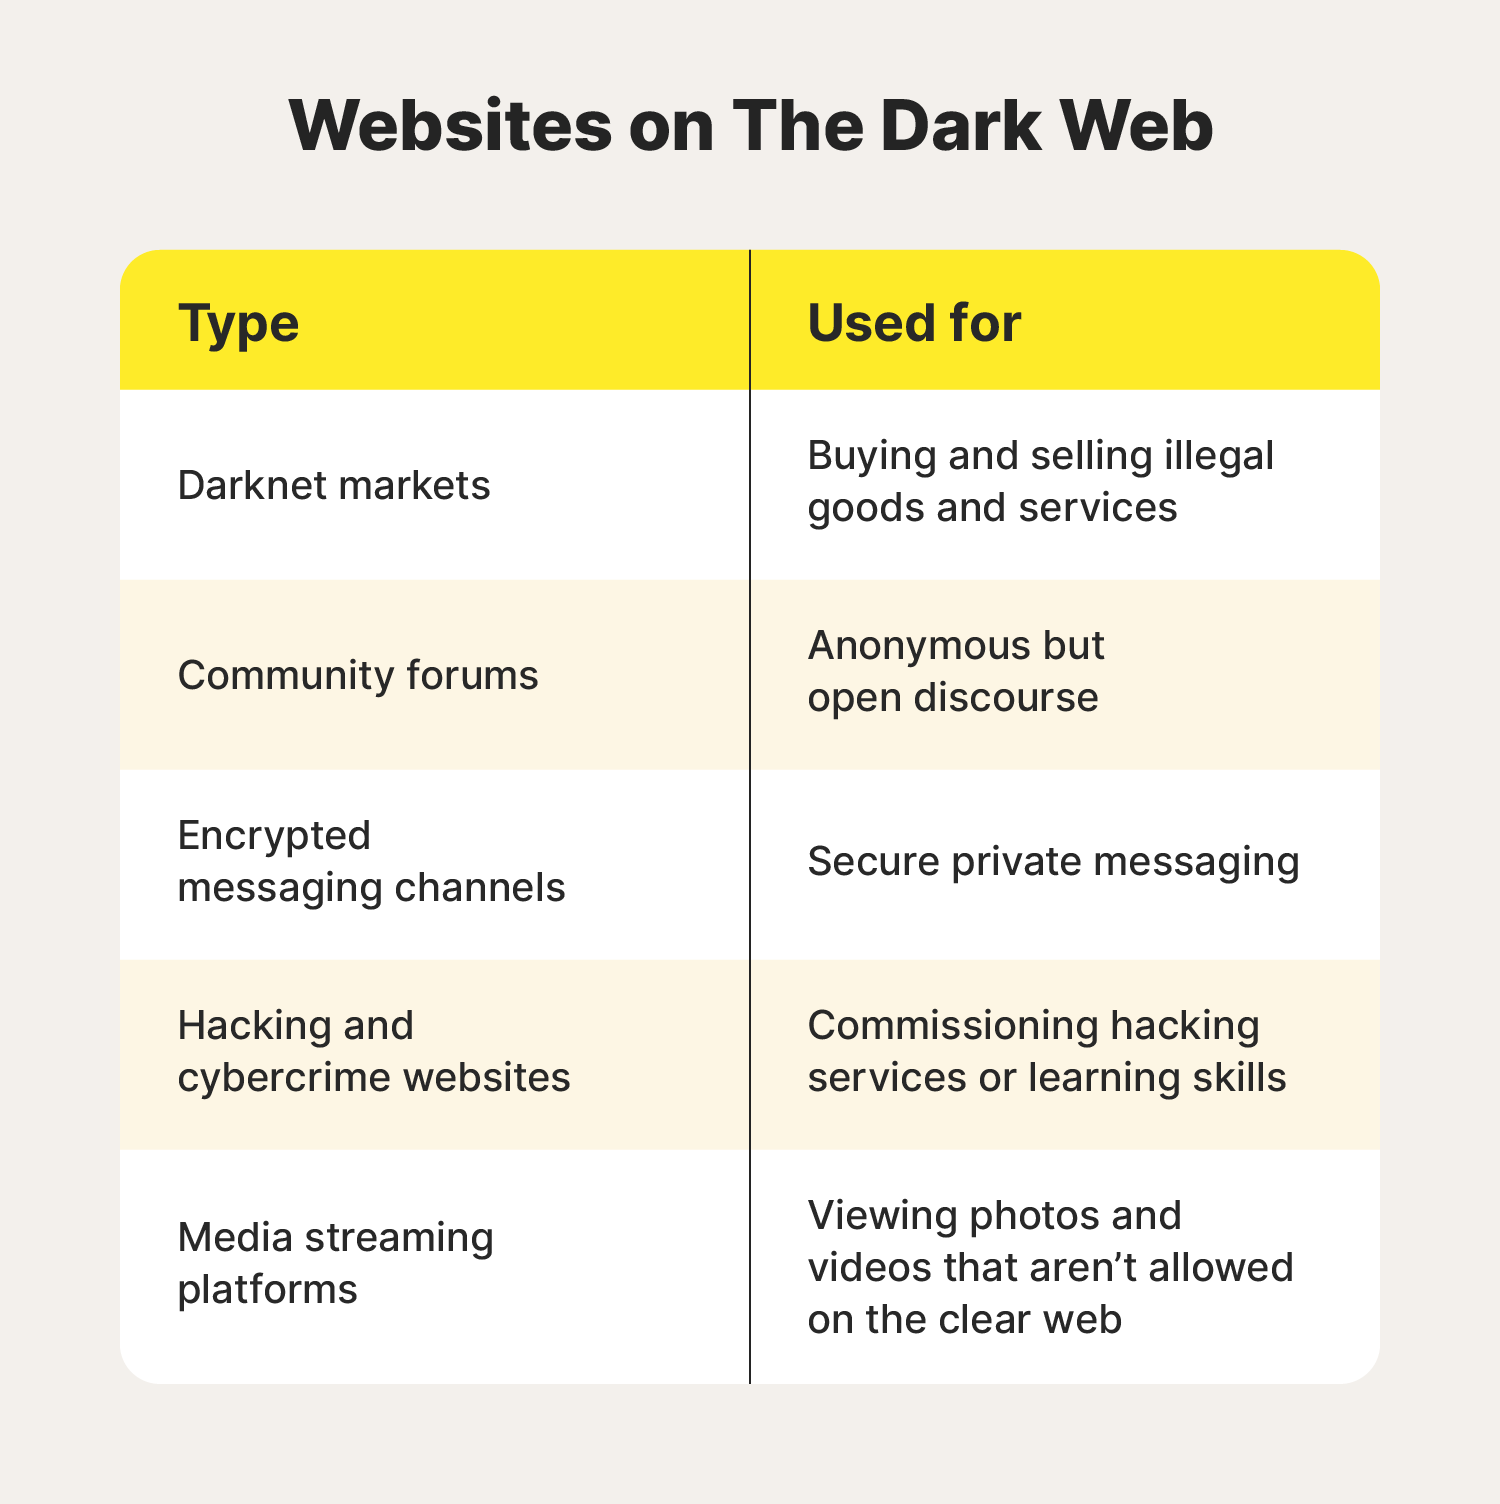 A list of types of dark web websites and details about what they’re for.